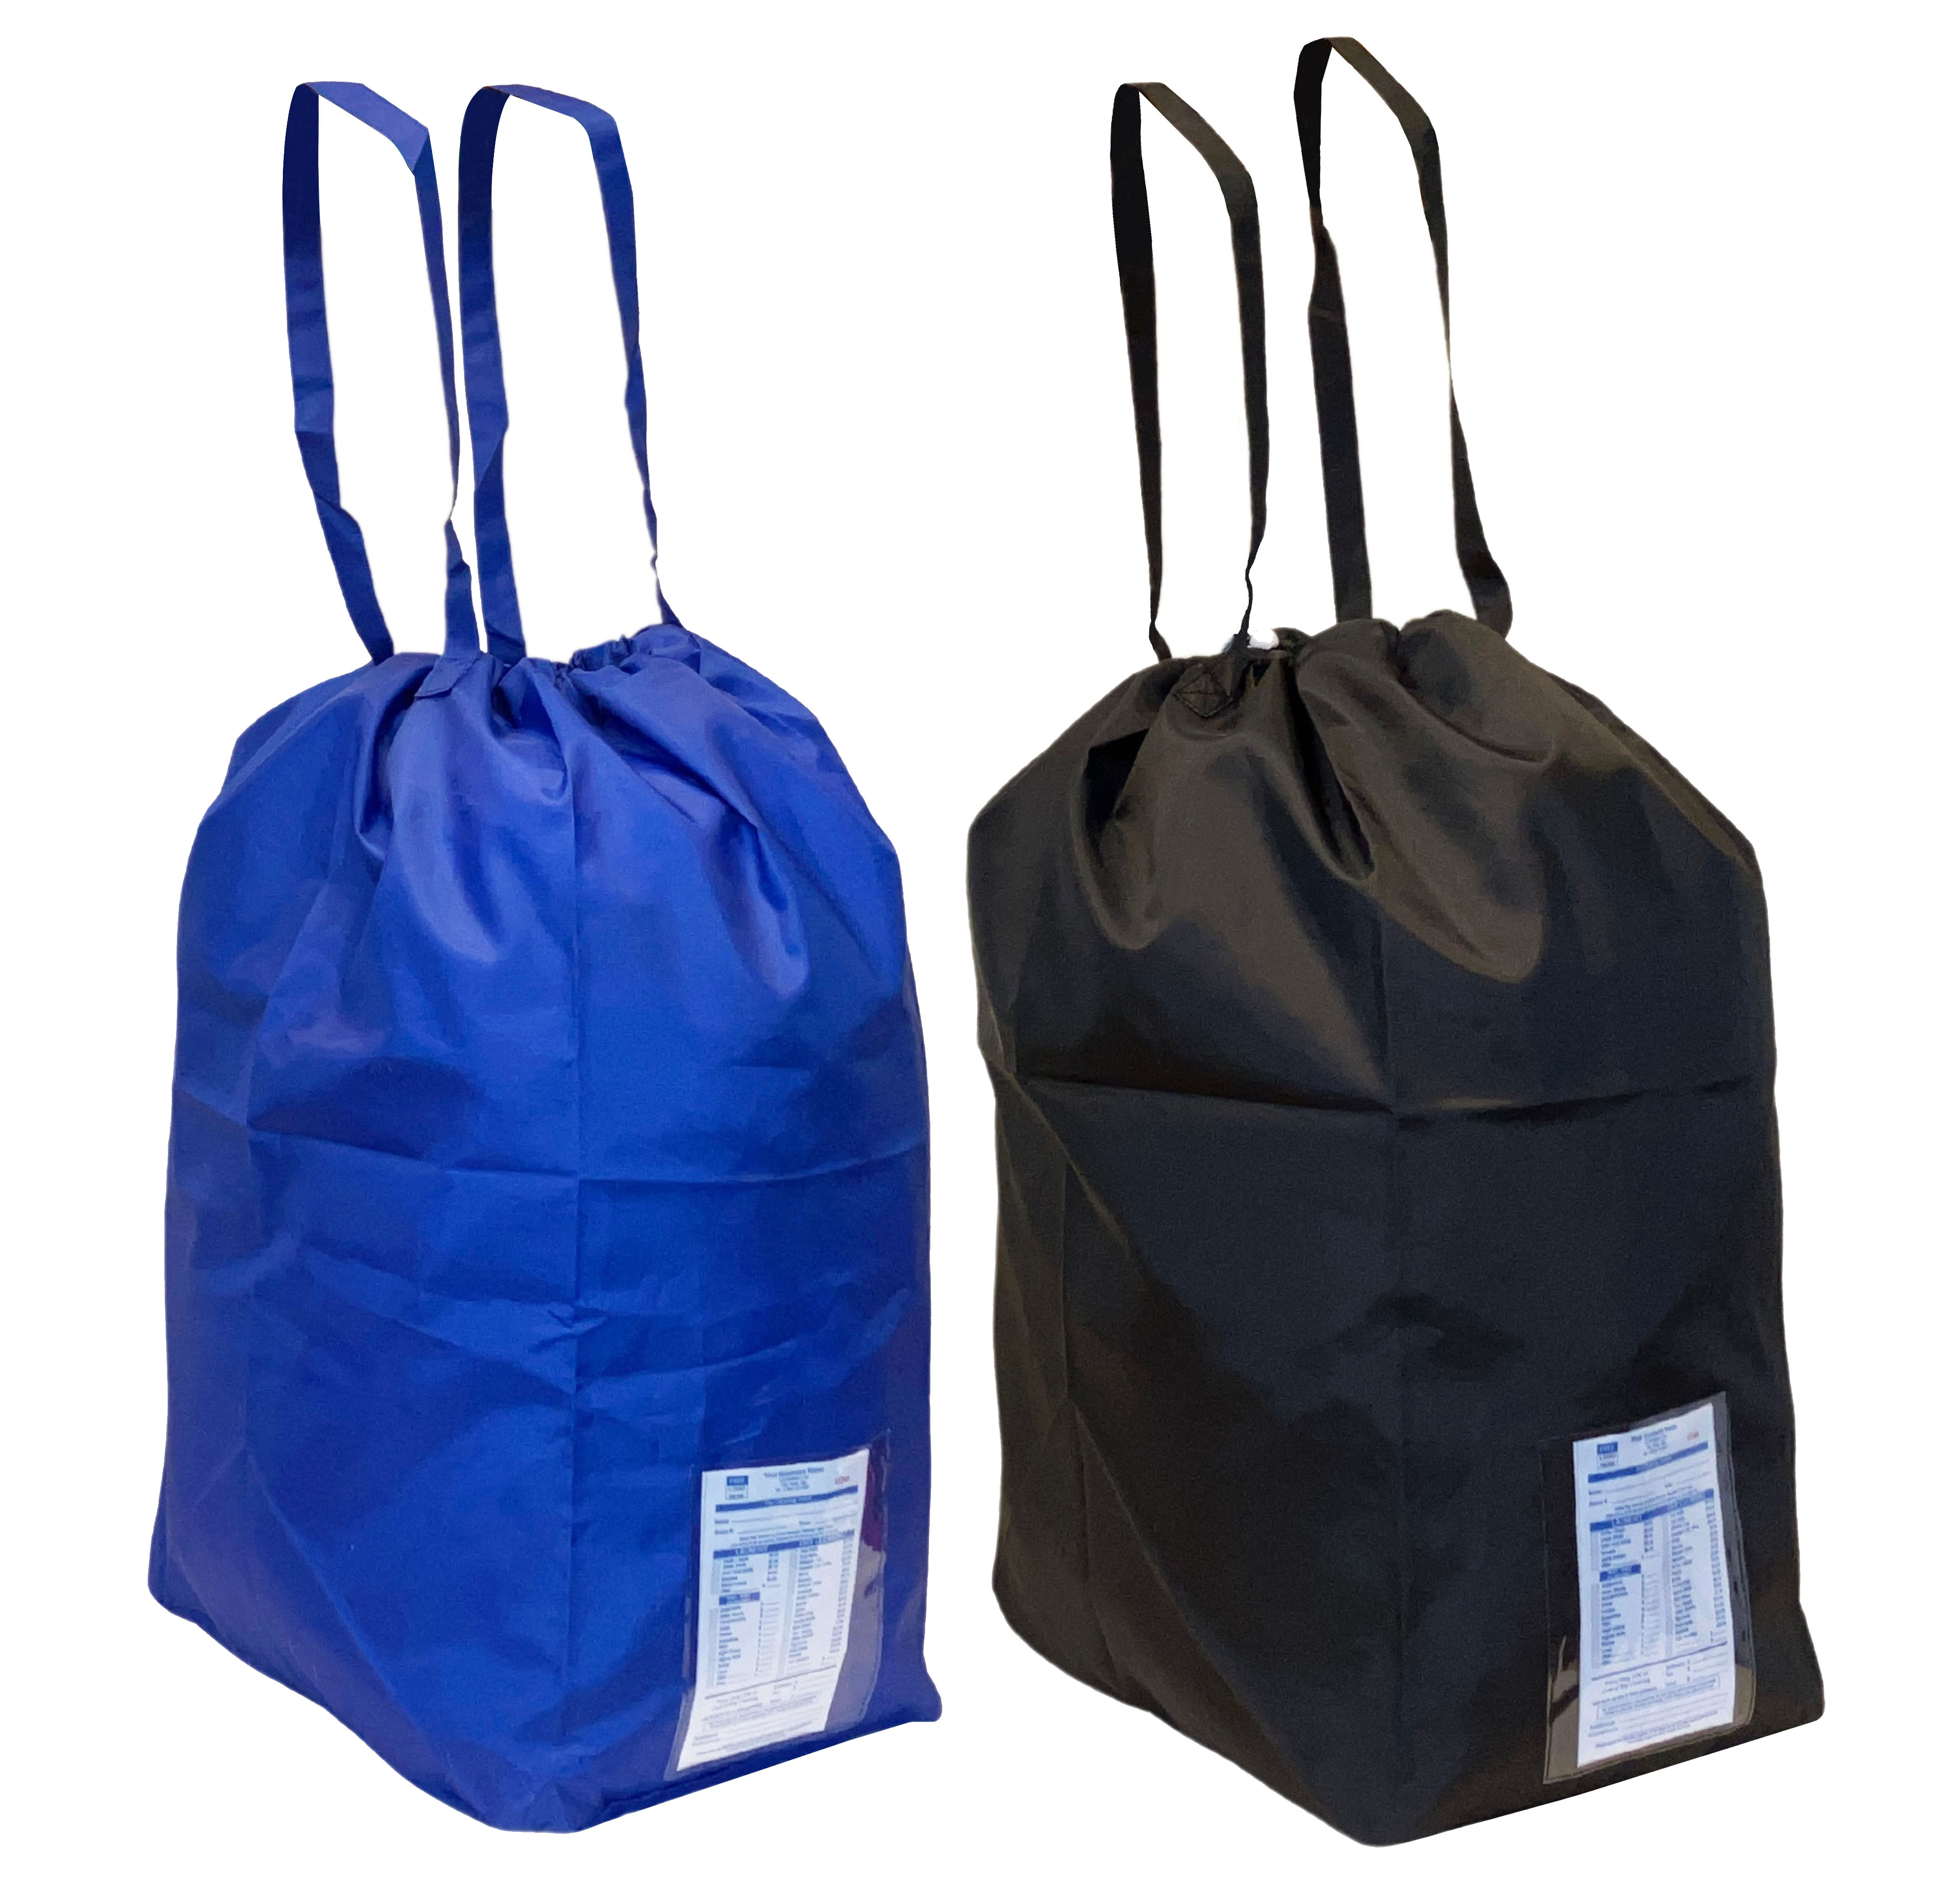 Large Wash and Fold Duffel Laundry Bag with Carry Handles (each)